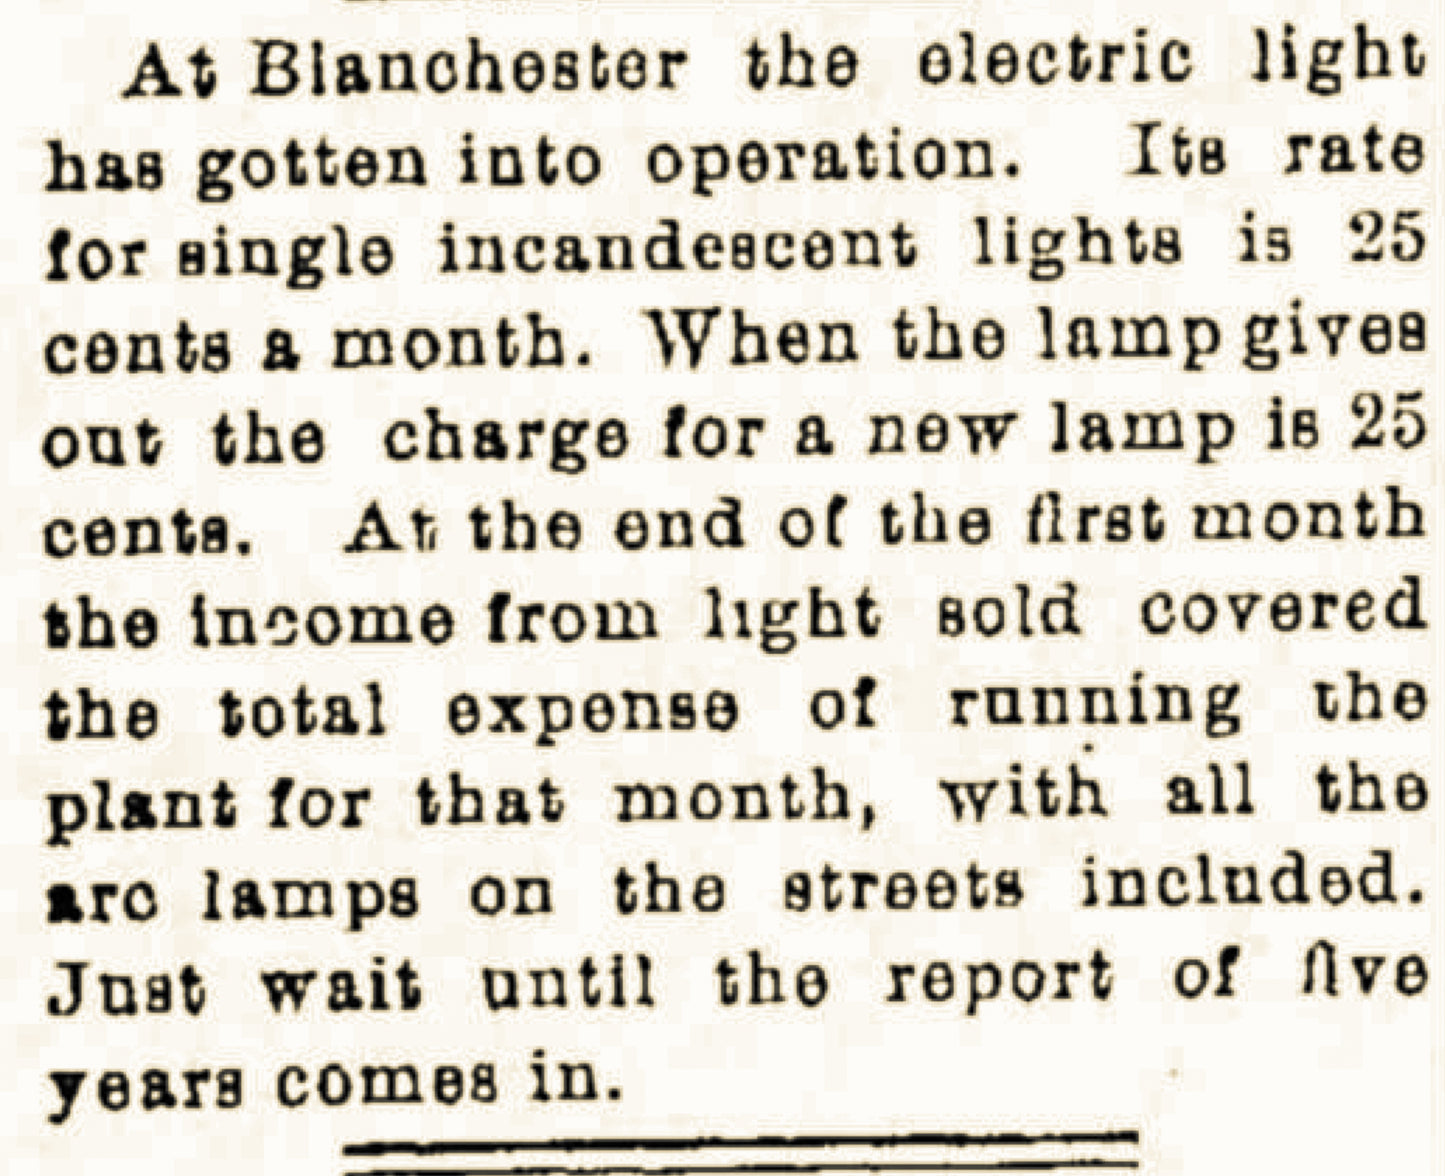 1897. Electric Lights Come to Blanchester.